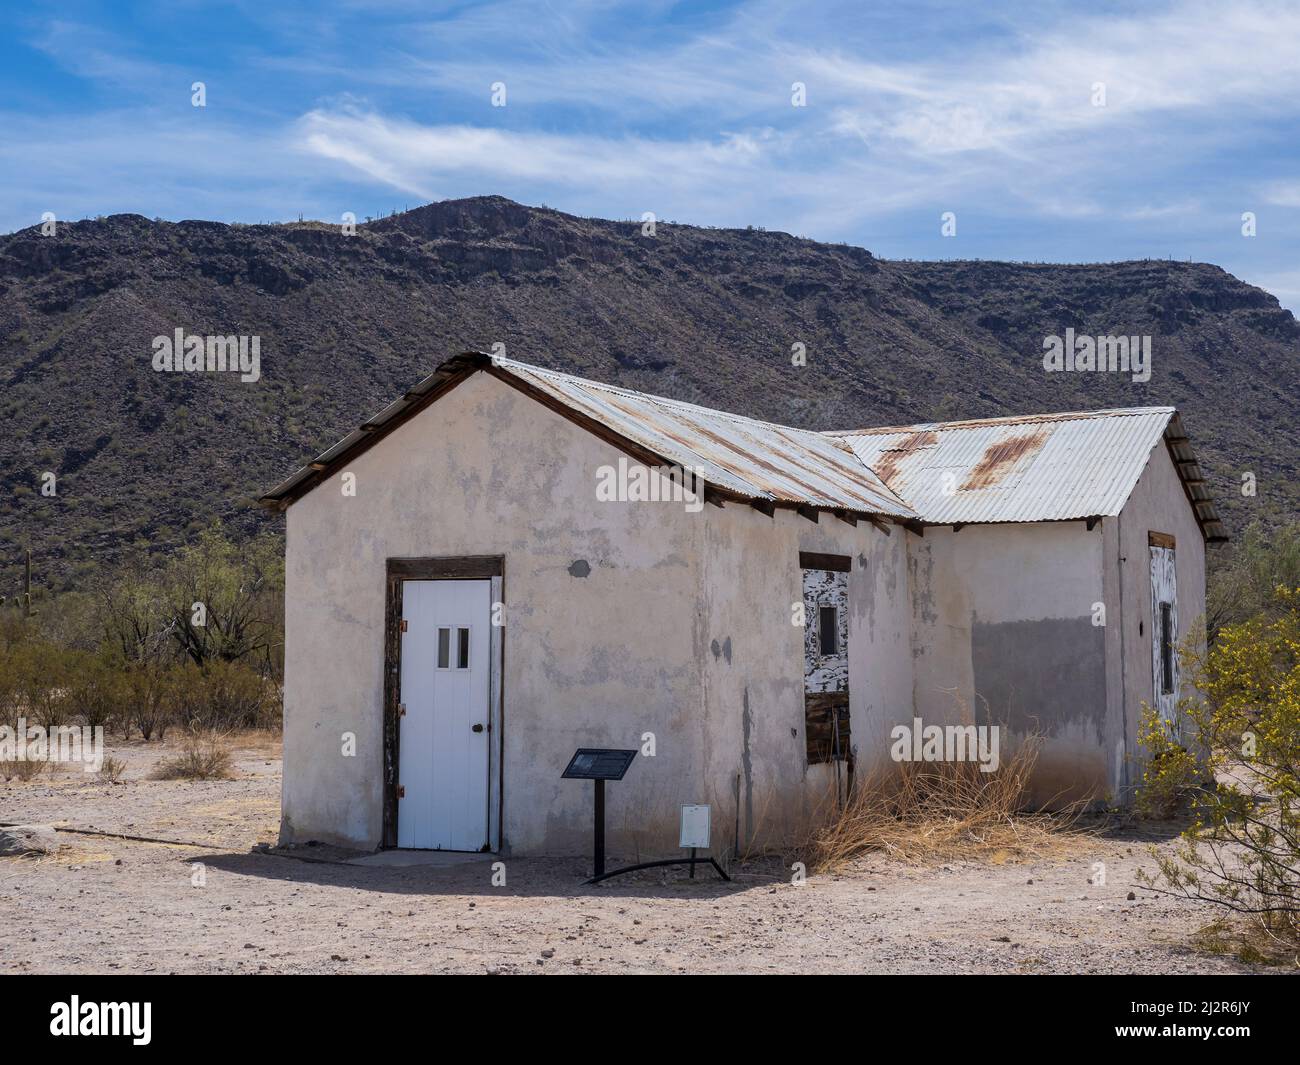 Henry Gray's home, Bates Well ranch, Organ Pipe Cactus National Monument, Arizona. Stock Photo